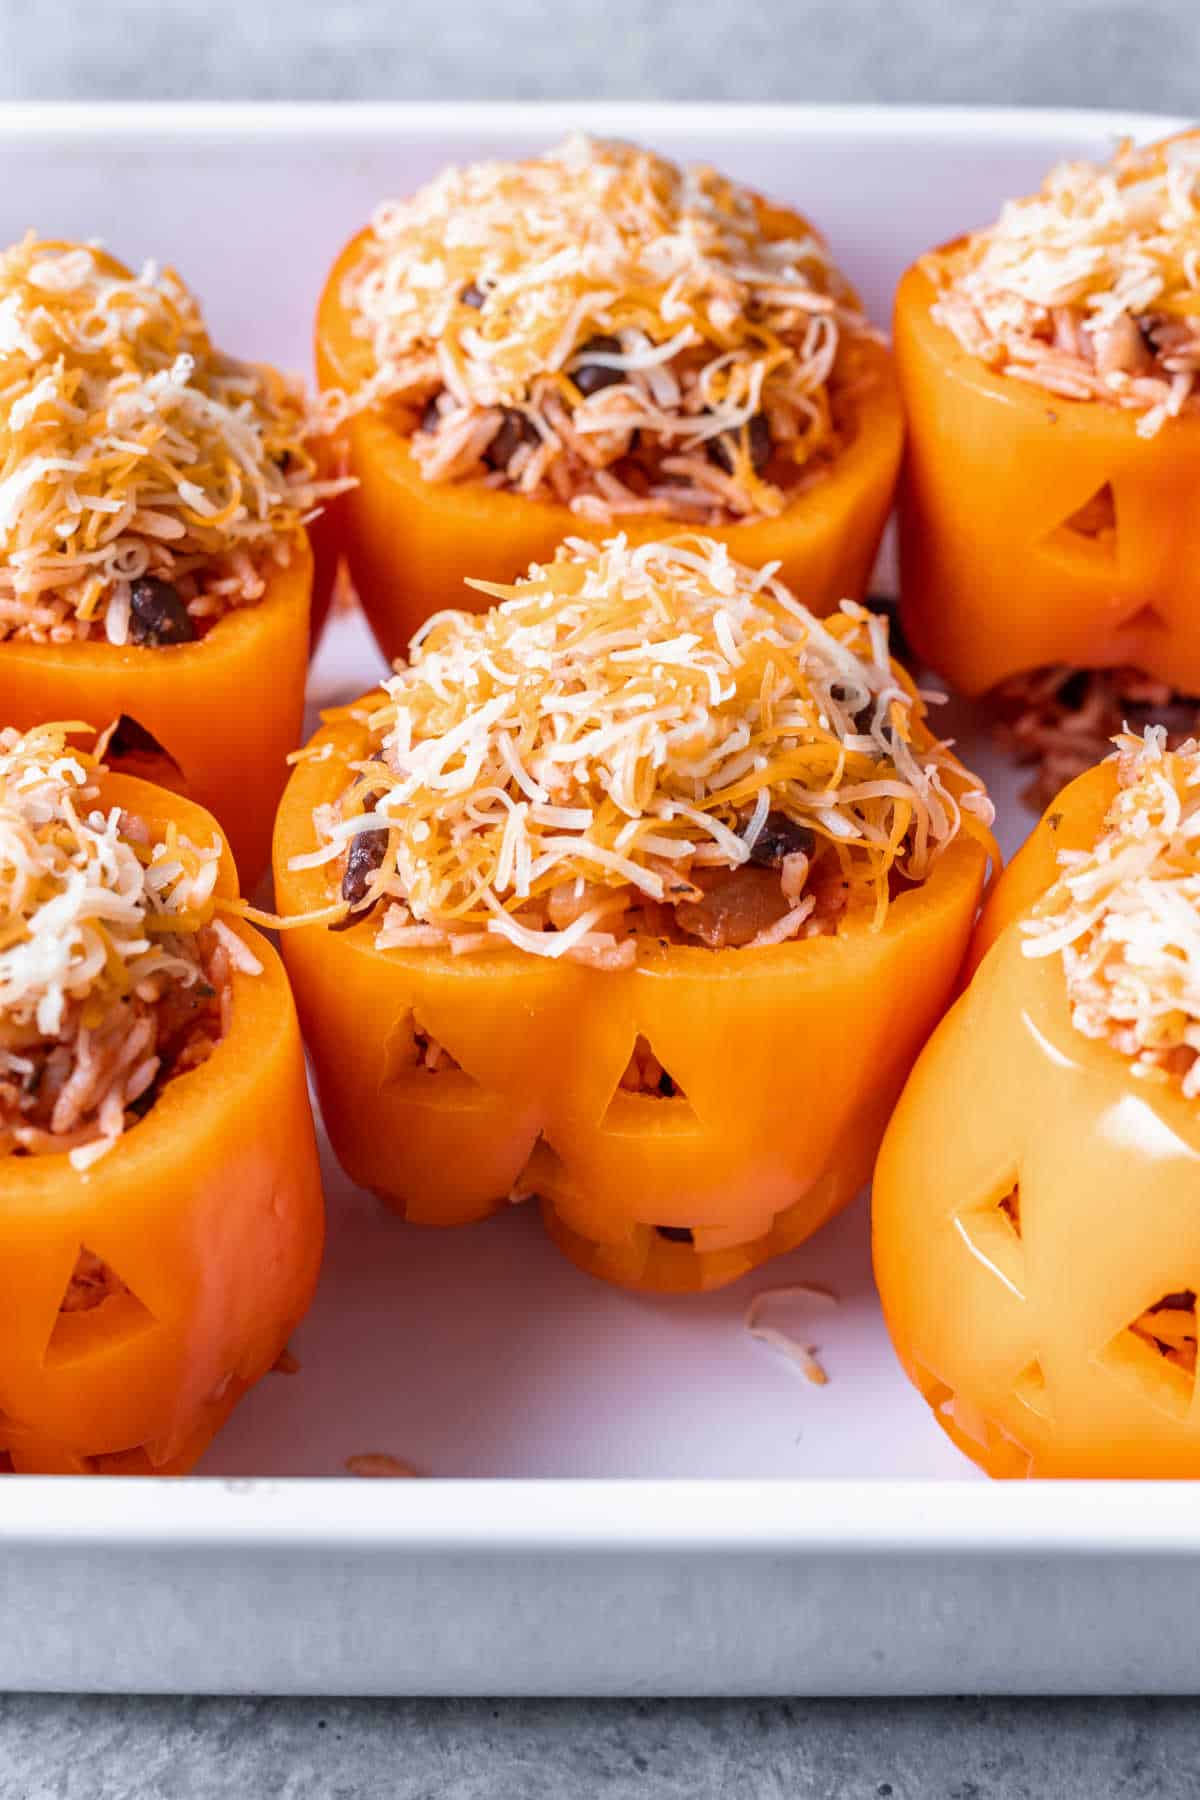 Shredded cheese on top of Halloween stuffed peppers. 